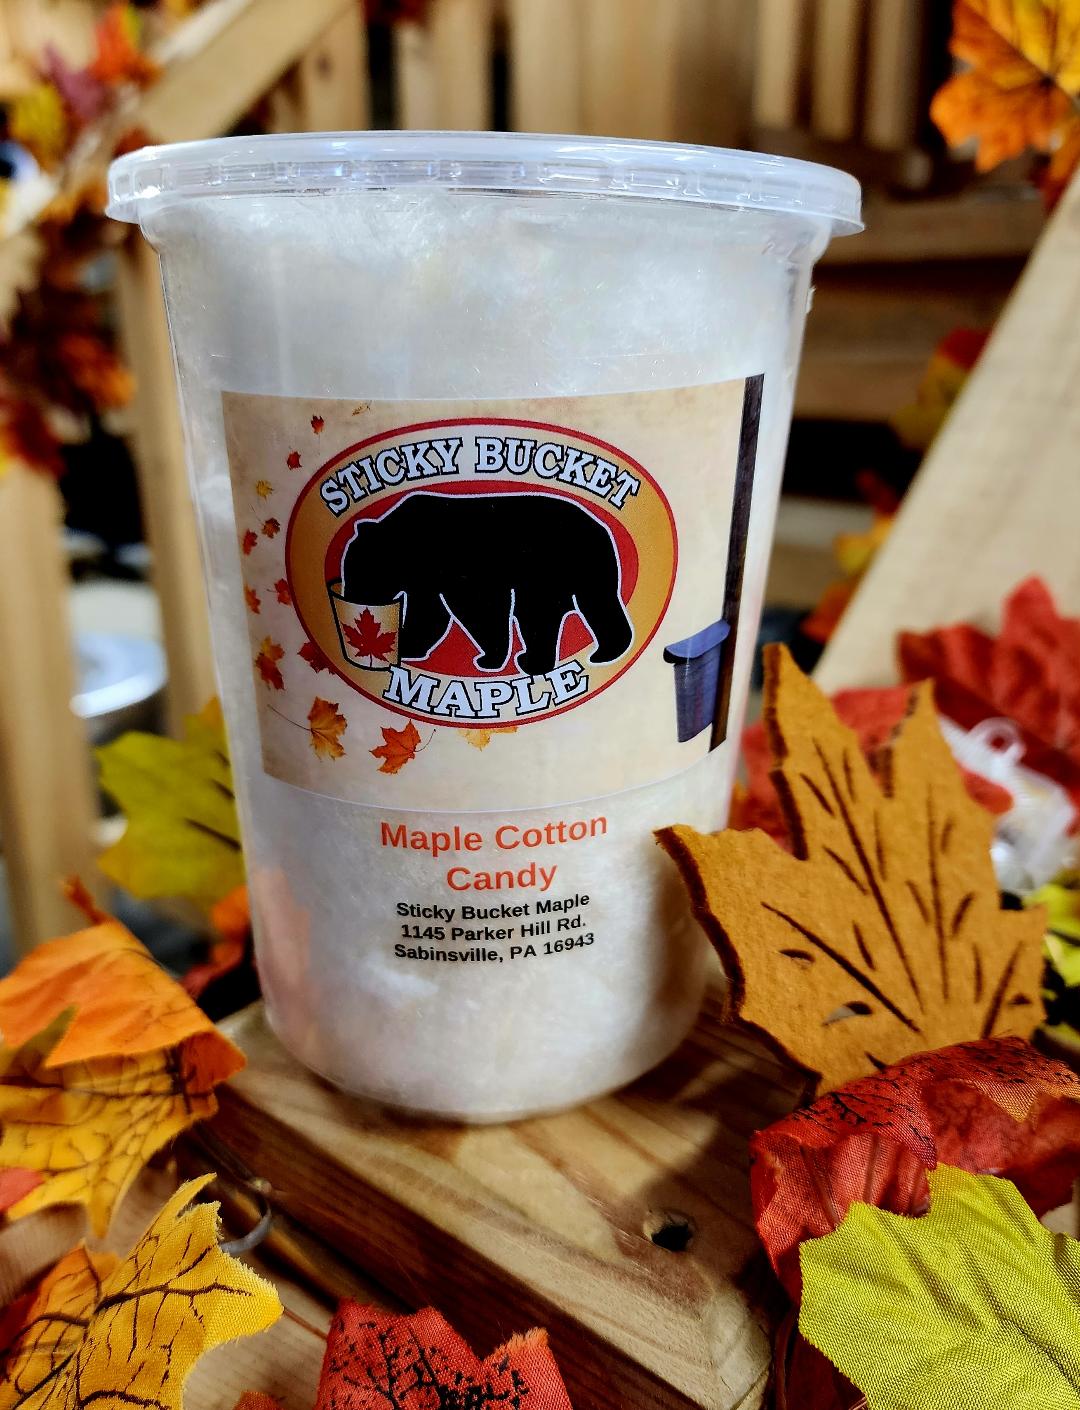 A Maple Cotton Candy in a Plastic Container